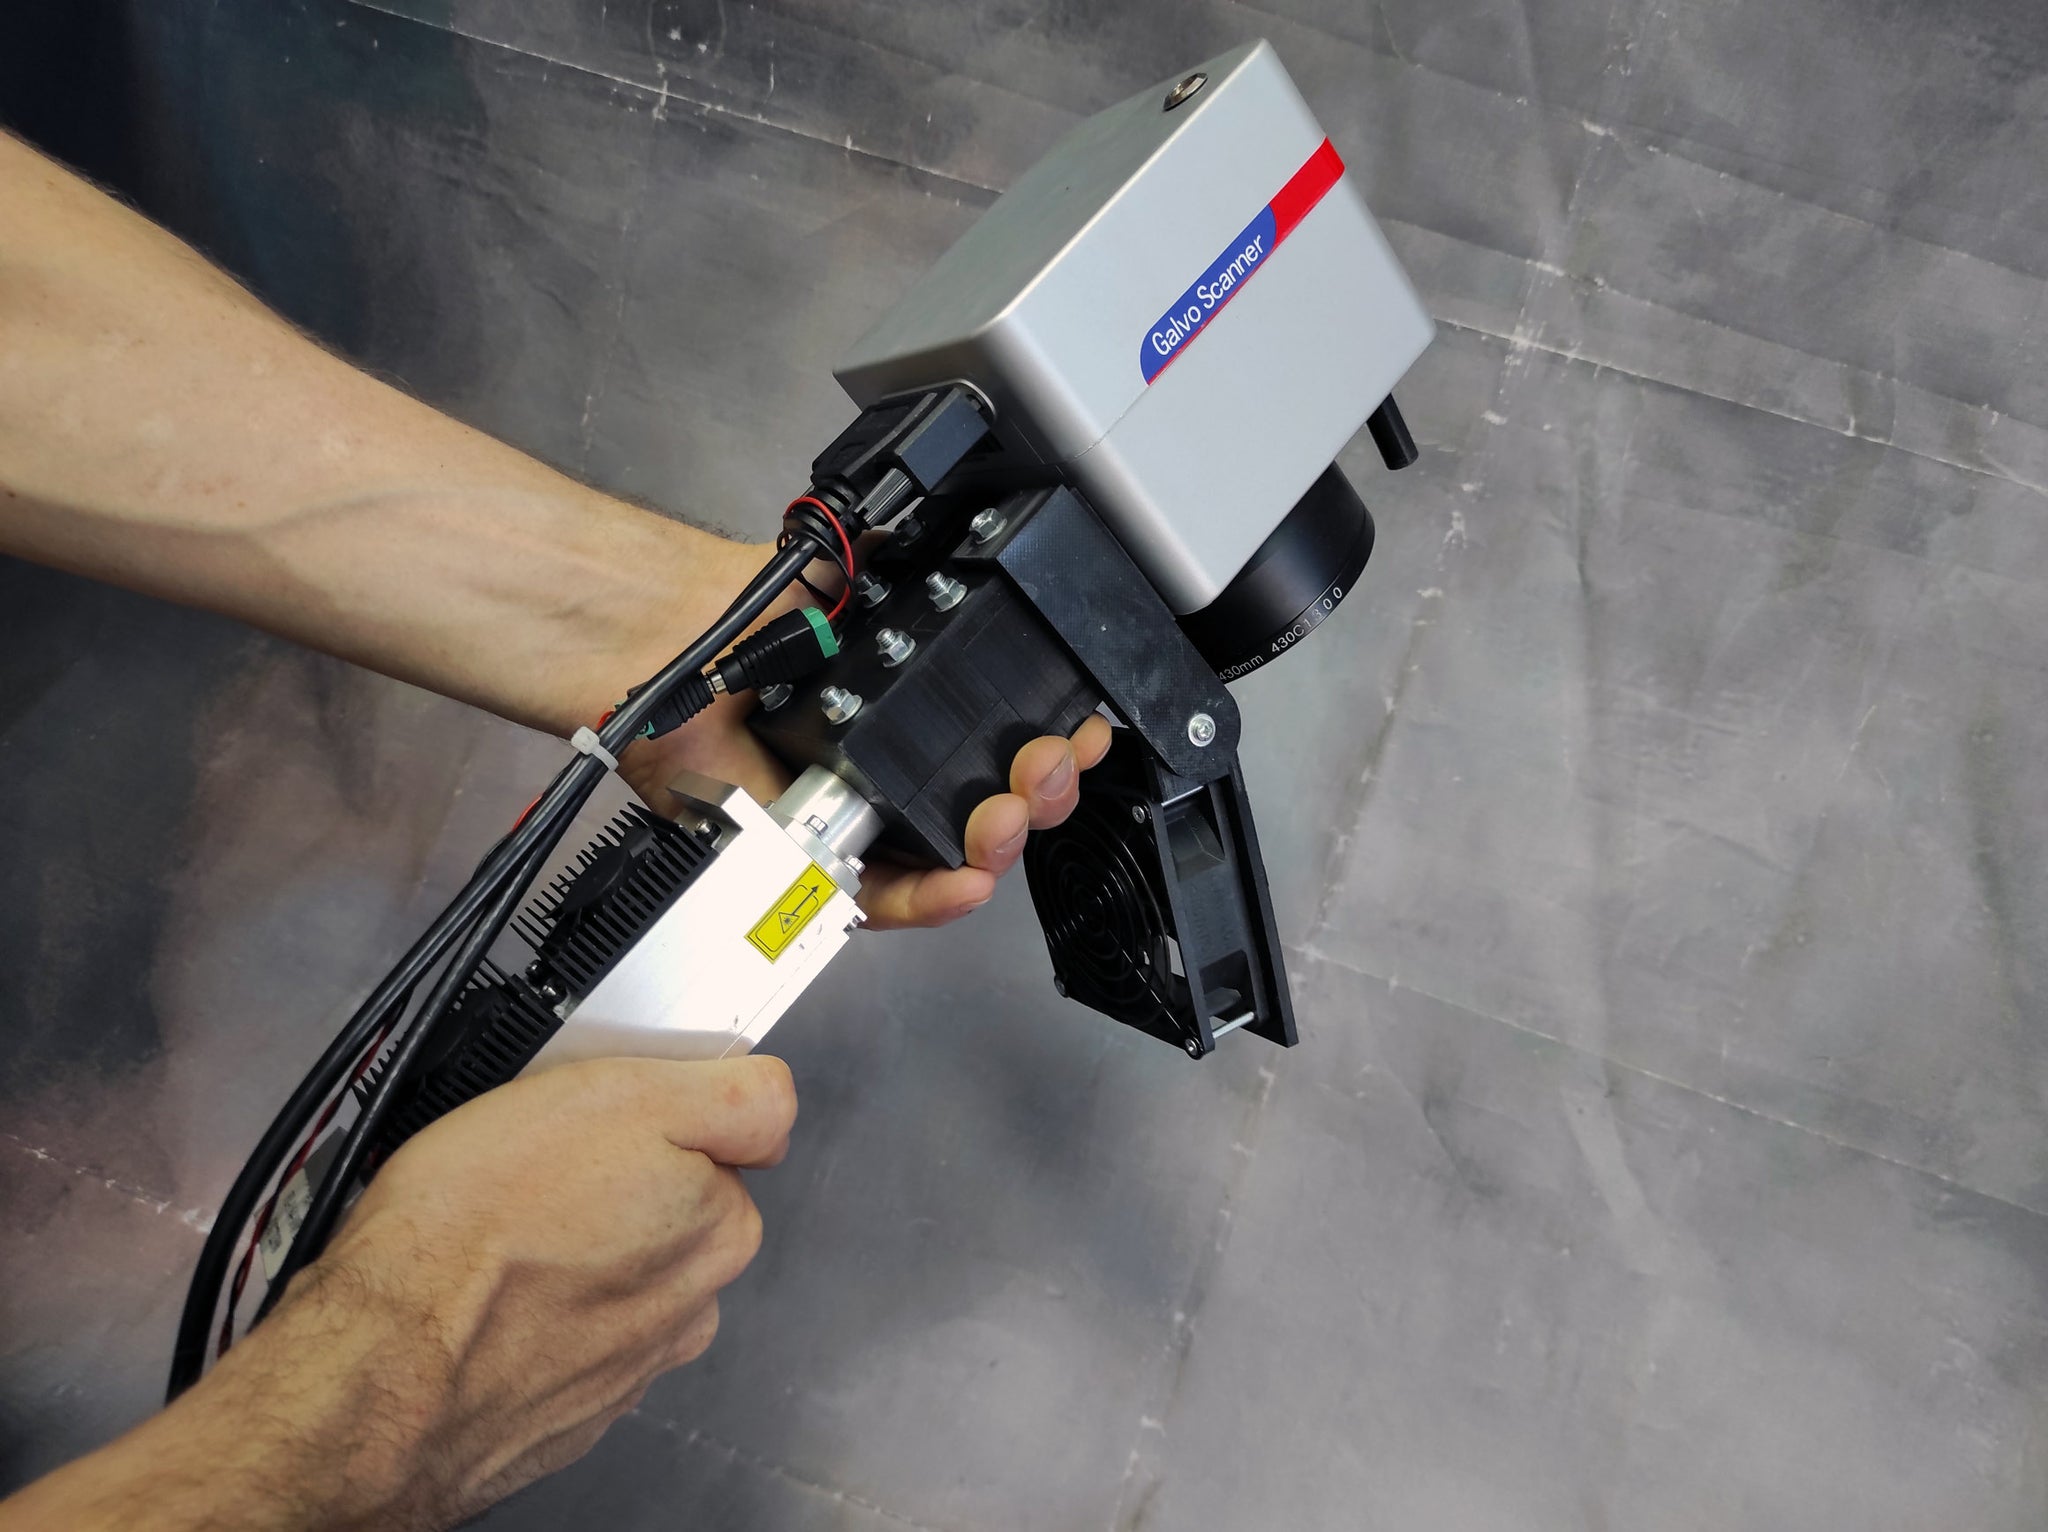 Hand-held laser rust removal instrument – Endurance Lasers